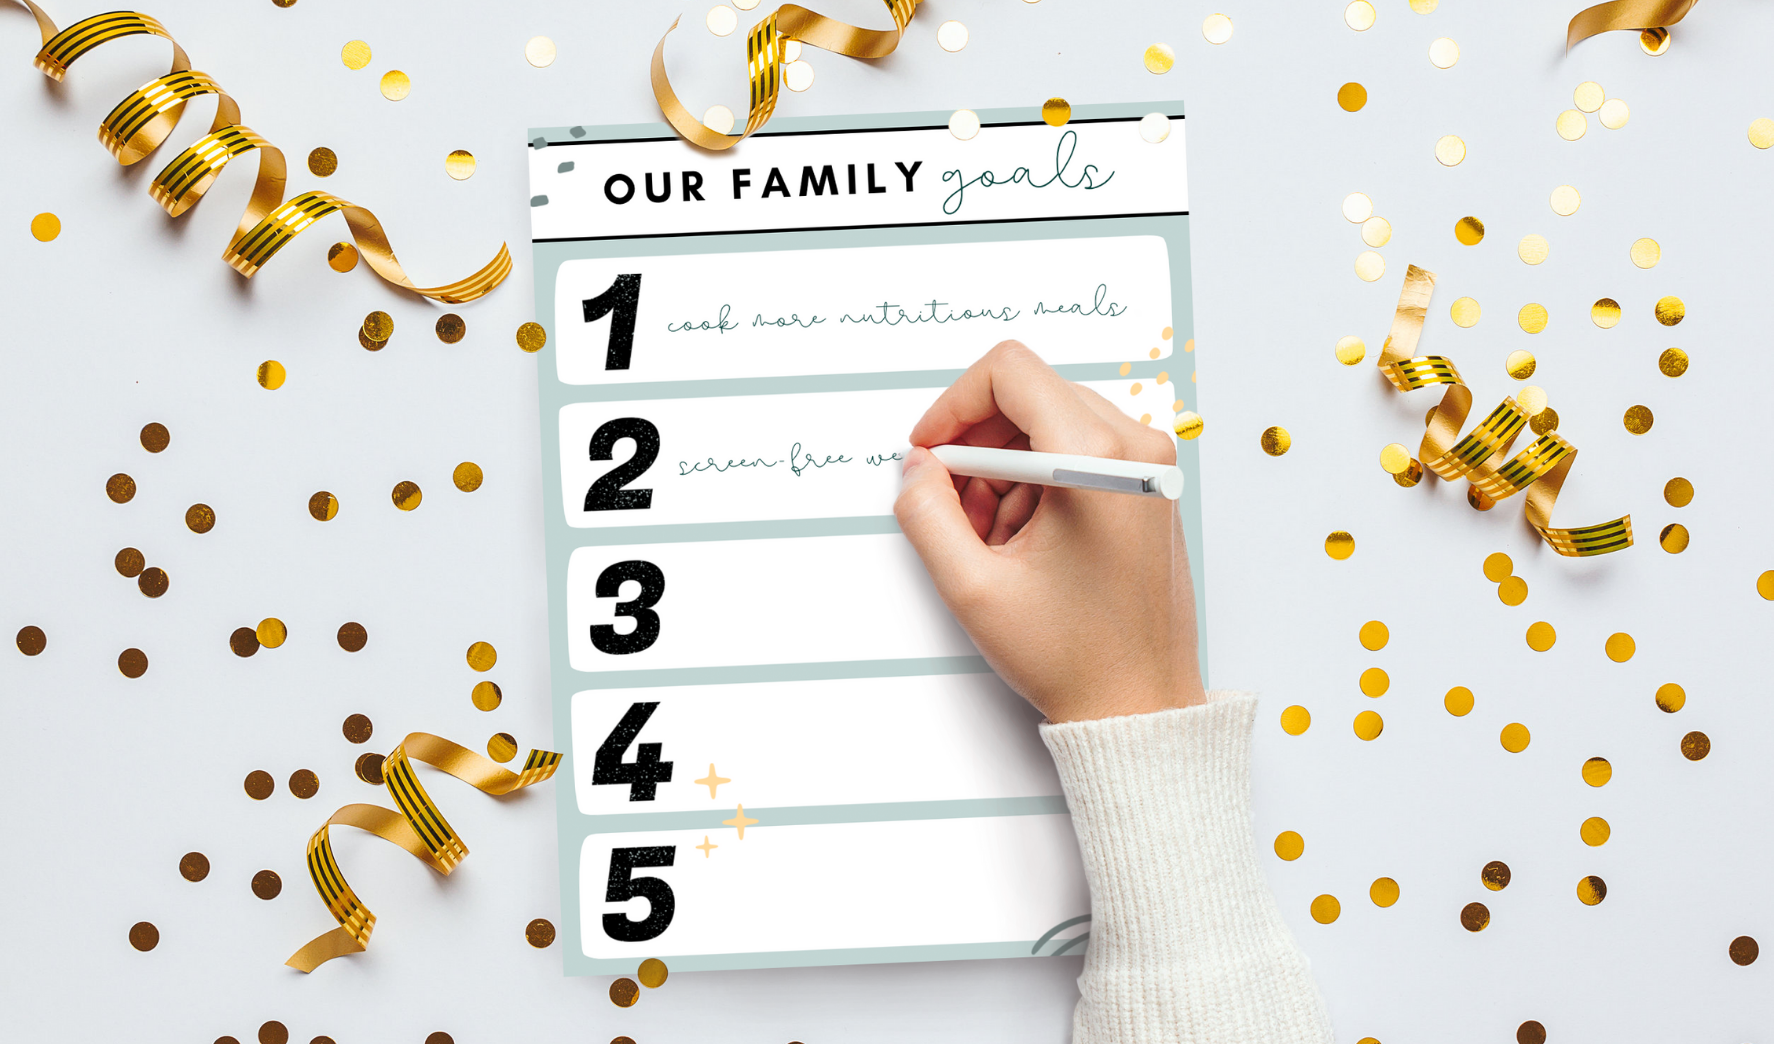 Family Goals Examples Free Printable Template - great for New Year's Resolutions too!